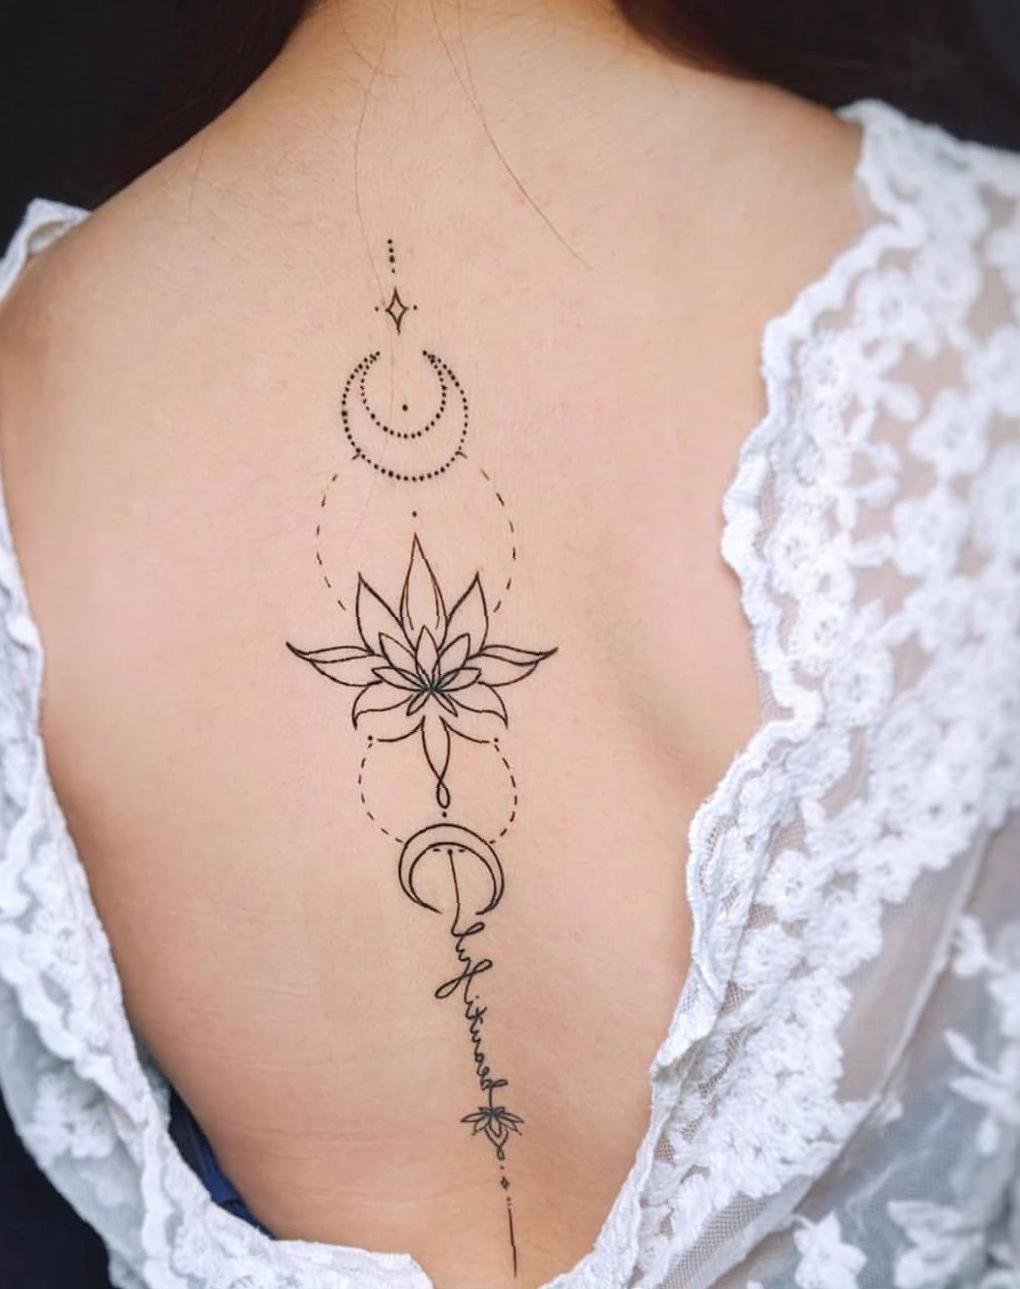 Stylish Back Tattoo Designs And Placement Ideas For Elegant Girls Body Tattoo Art